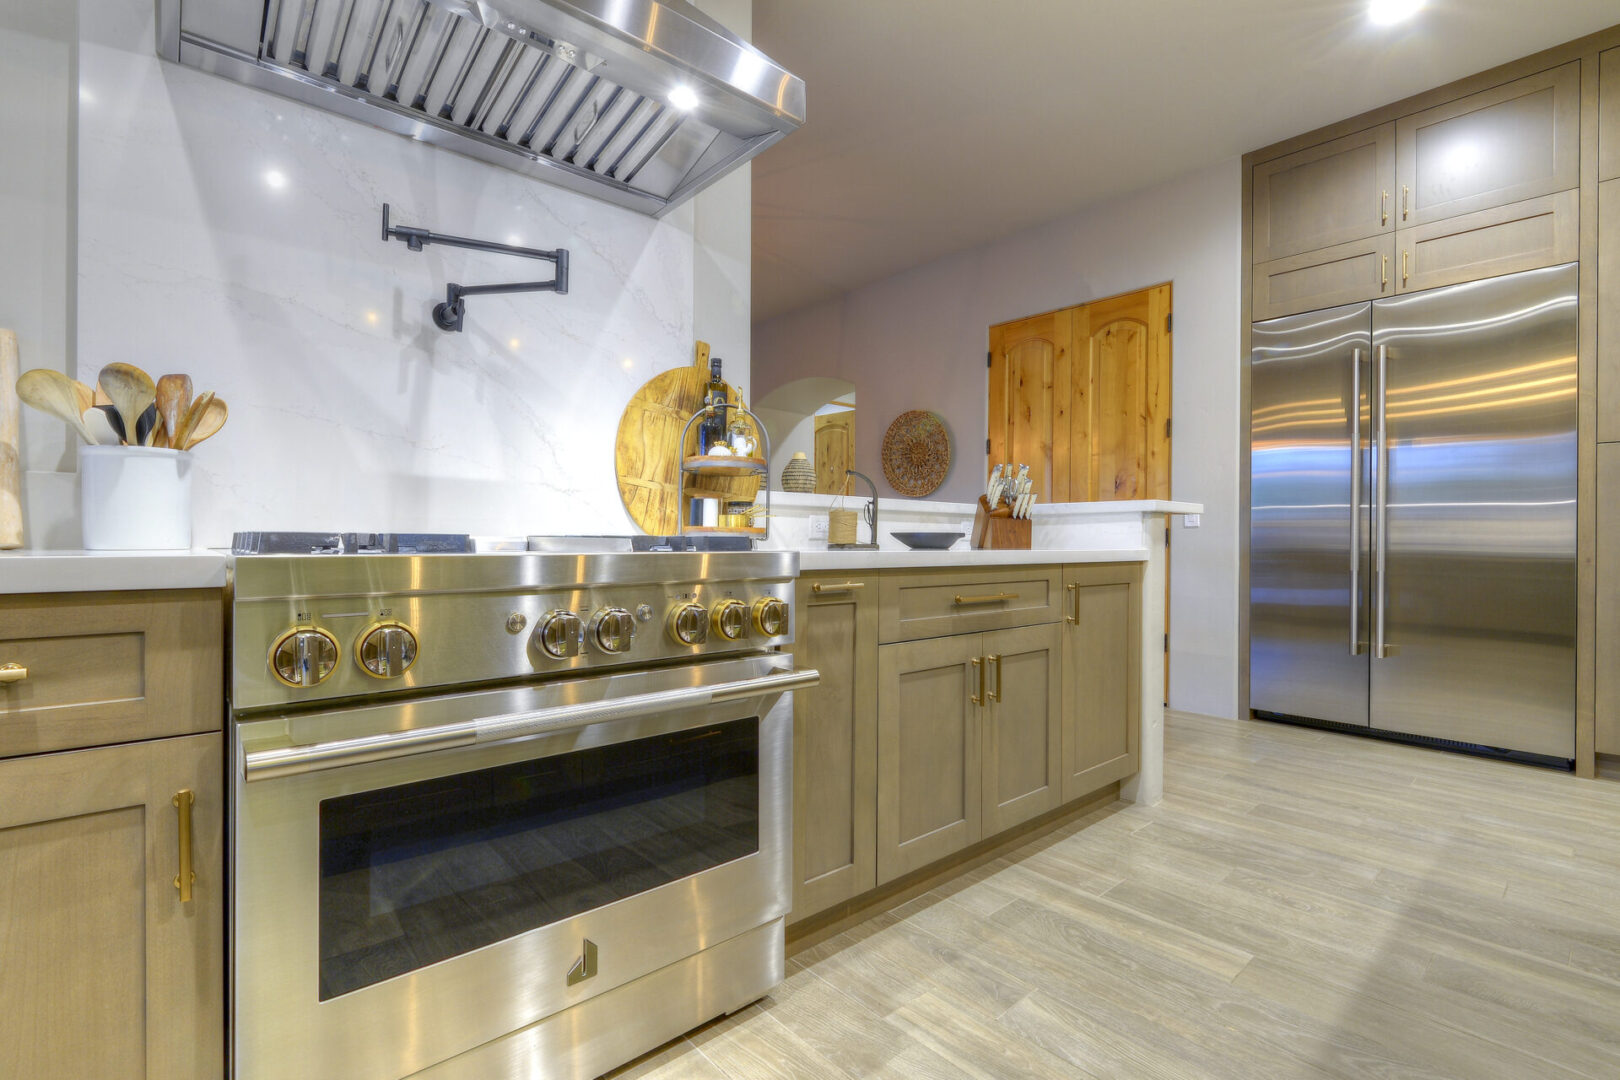 A kitchen with stainless steel appliances and wooden cabinets.